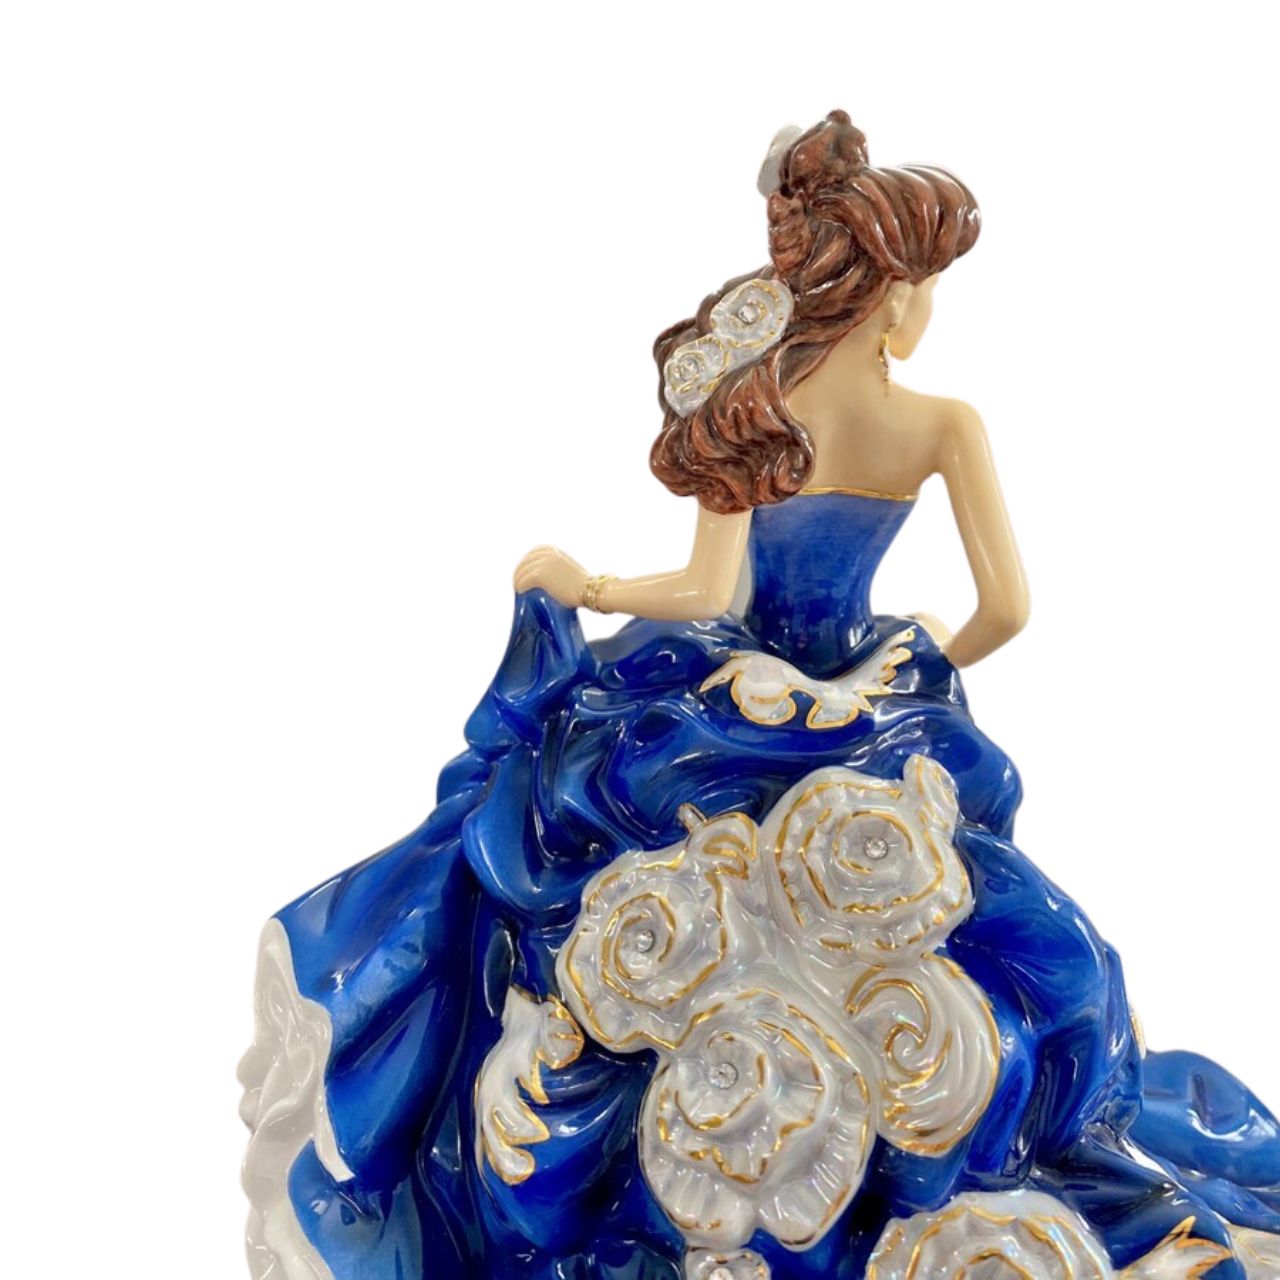 English Ladies Moonlight Enchantment  Our fabulous Moonlight Enchantment figurine is the latest figure in the English Ladies Co range.  Designed and modelled by Valerie Annand, our master painter Dan Smith has created this wonderful colourway.